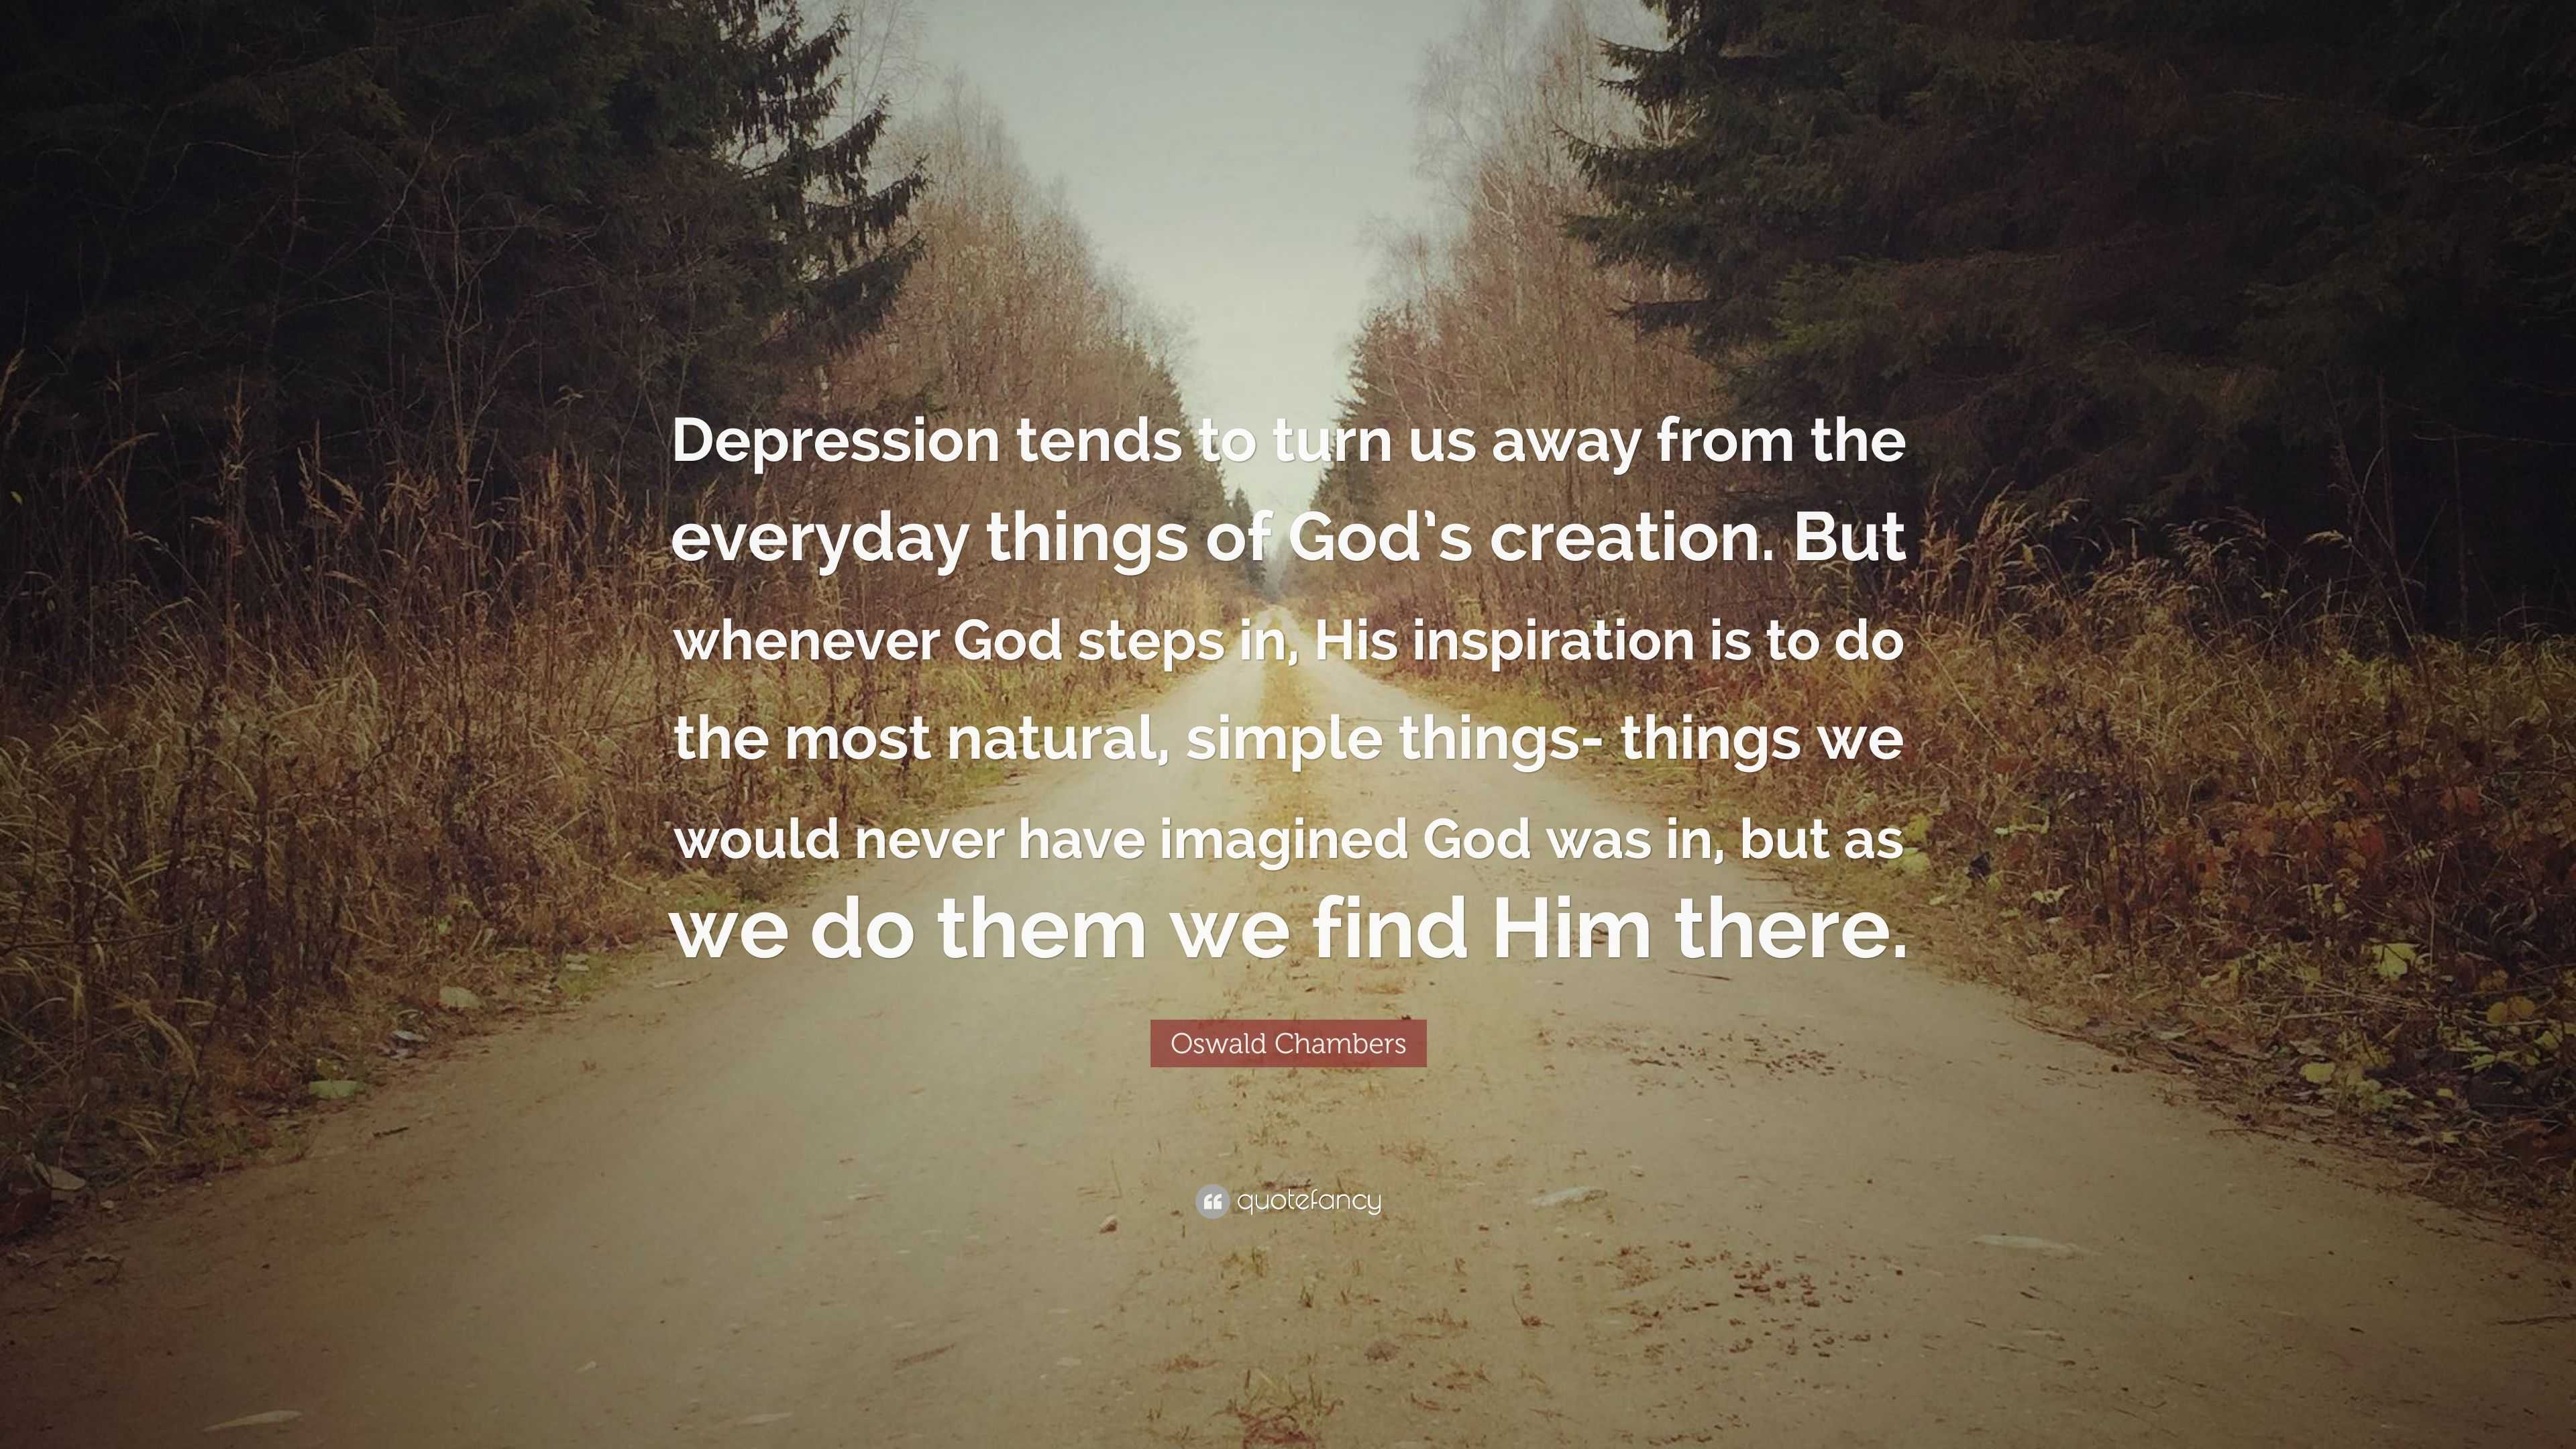 Oswald Chambers Quote: “Depression tends to turn us away from the everyday  things of God's creation. But whenever God steps in, His inspiration ”